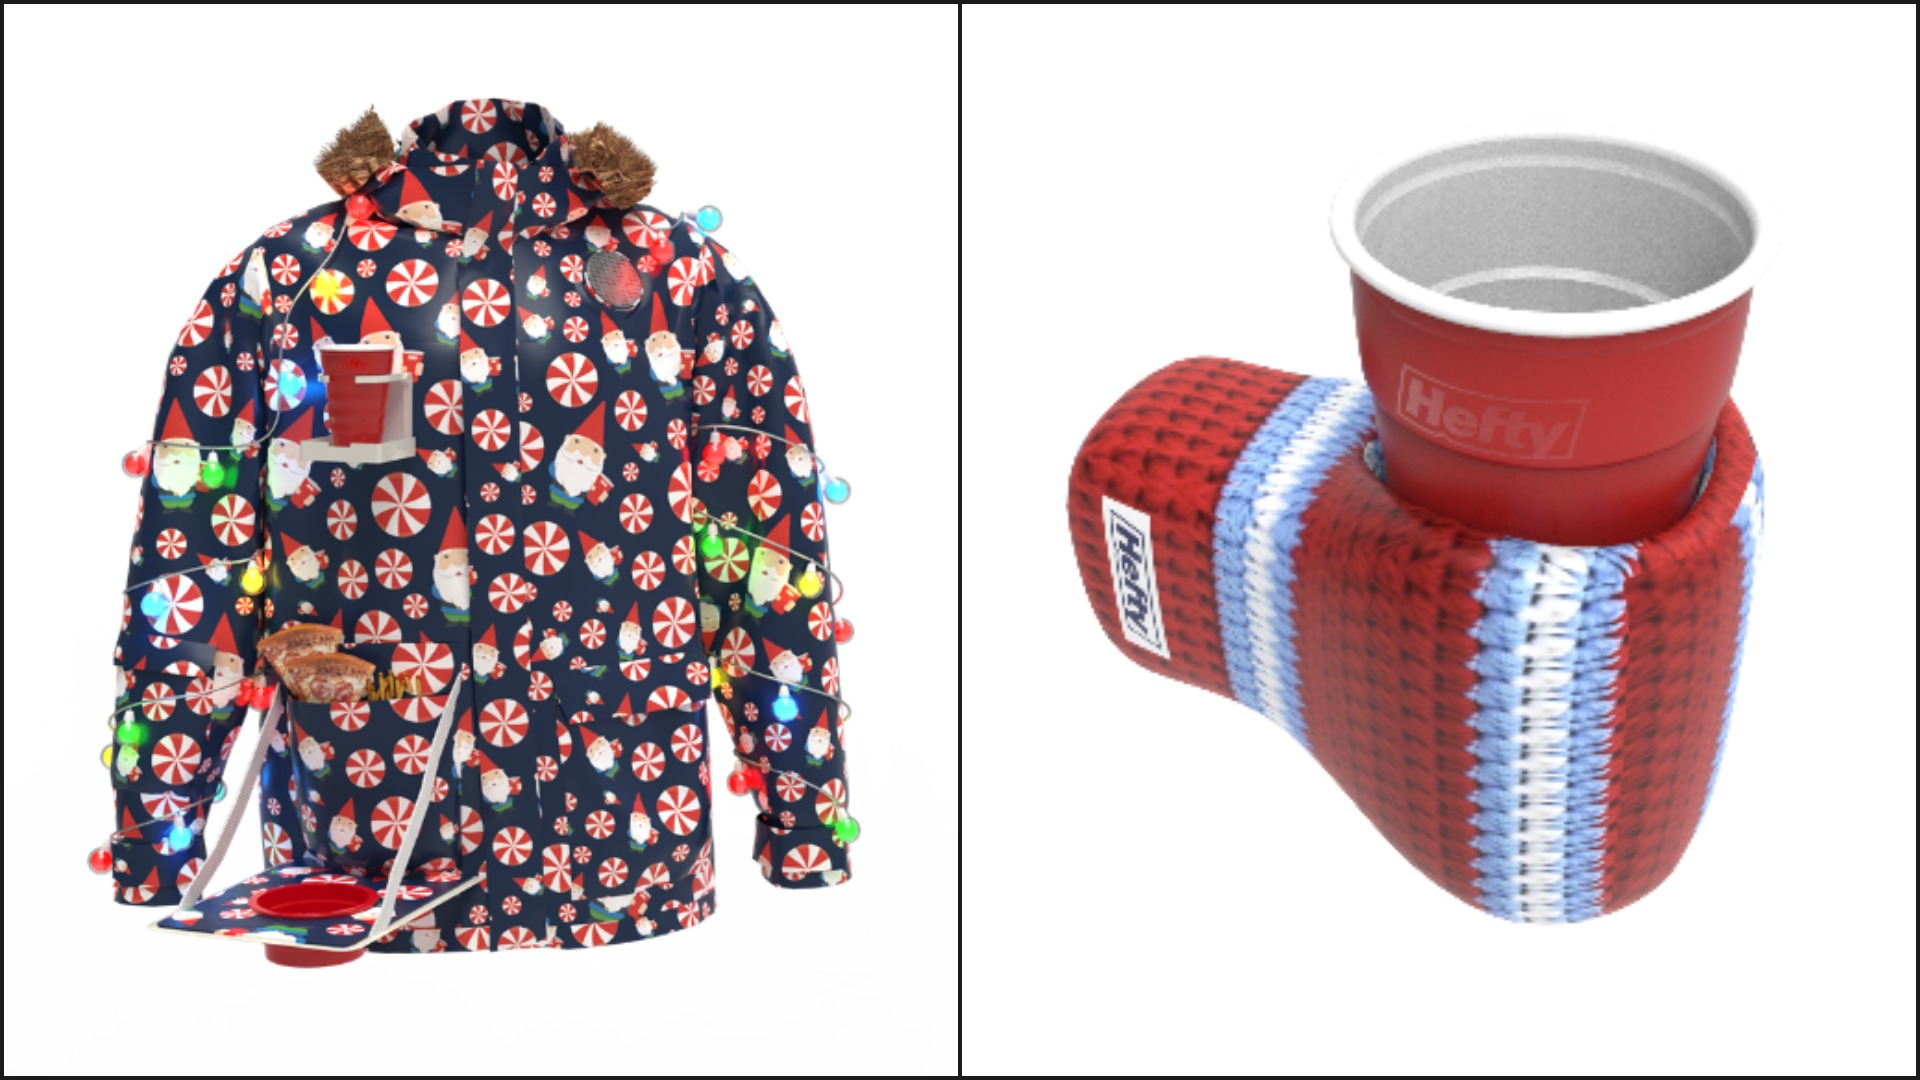 Left: a Hefty Party Cup Parka; Right: A Hefty Mitten Koozie [images provided by Hefty]